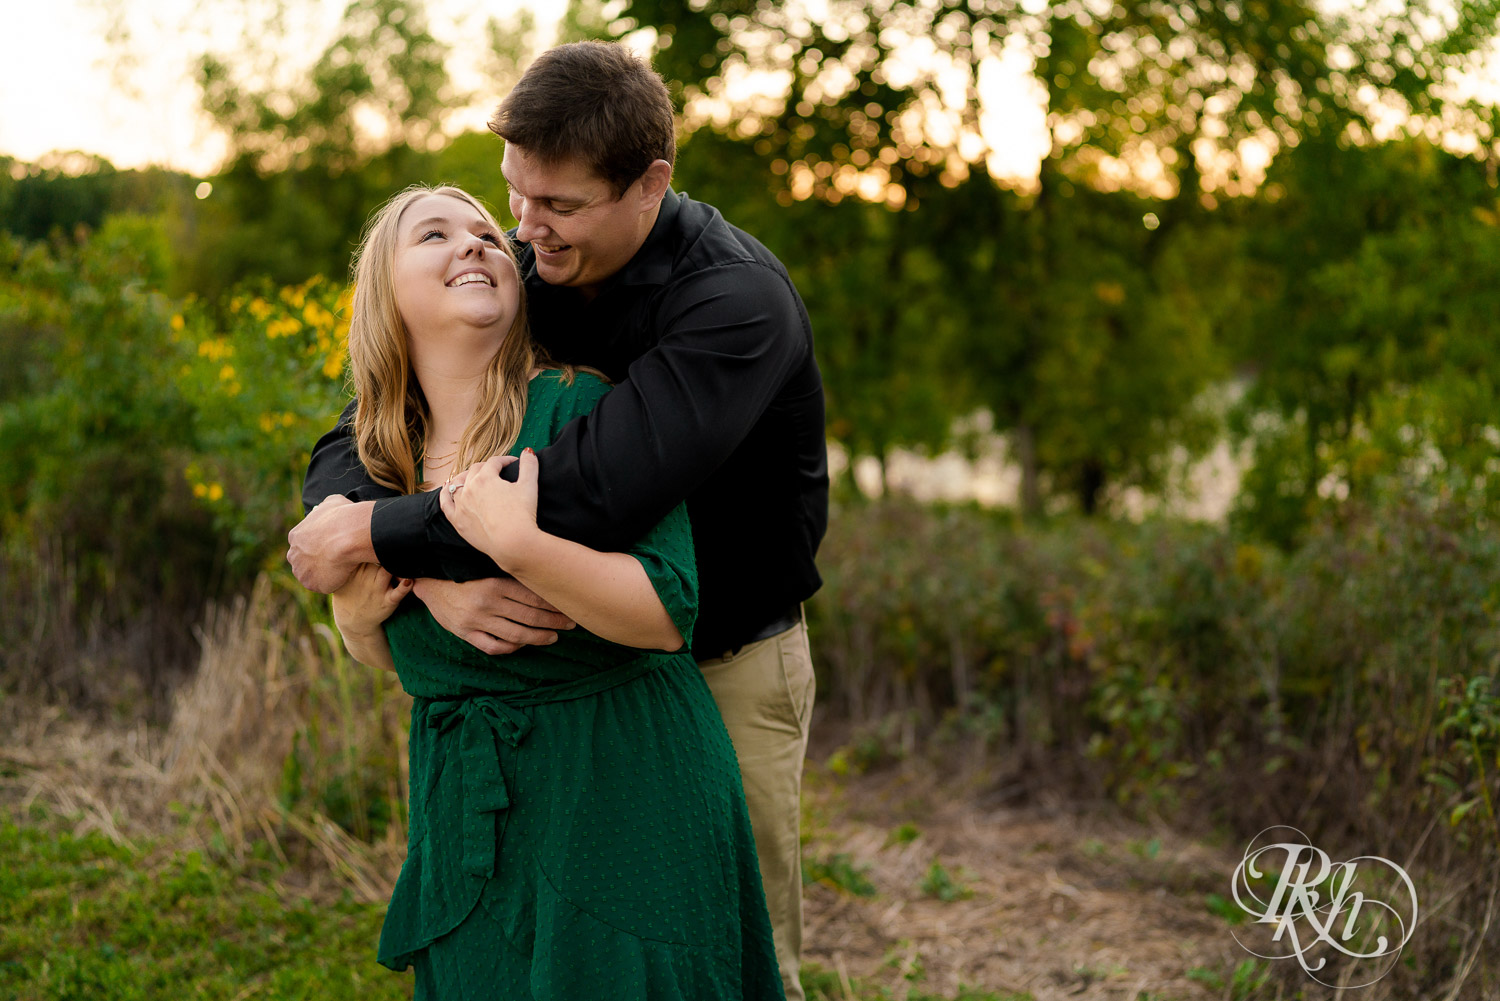 Man in black dress shirt hugging woman in green dress in front of trees and flowers in Eagan, Minnesota.